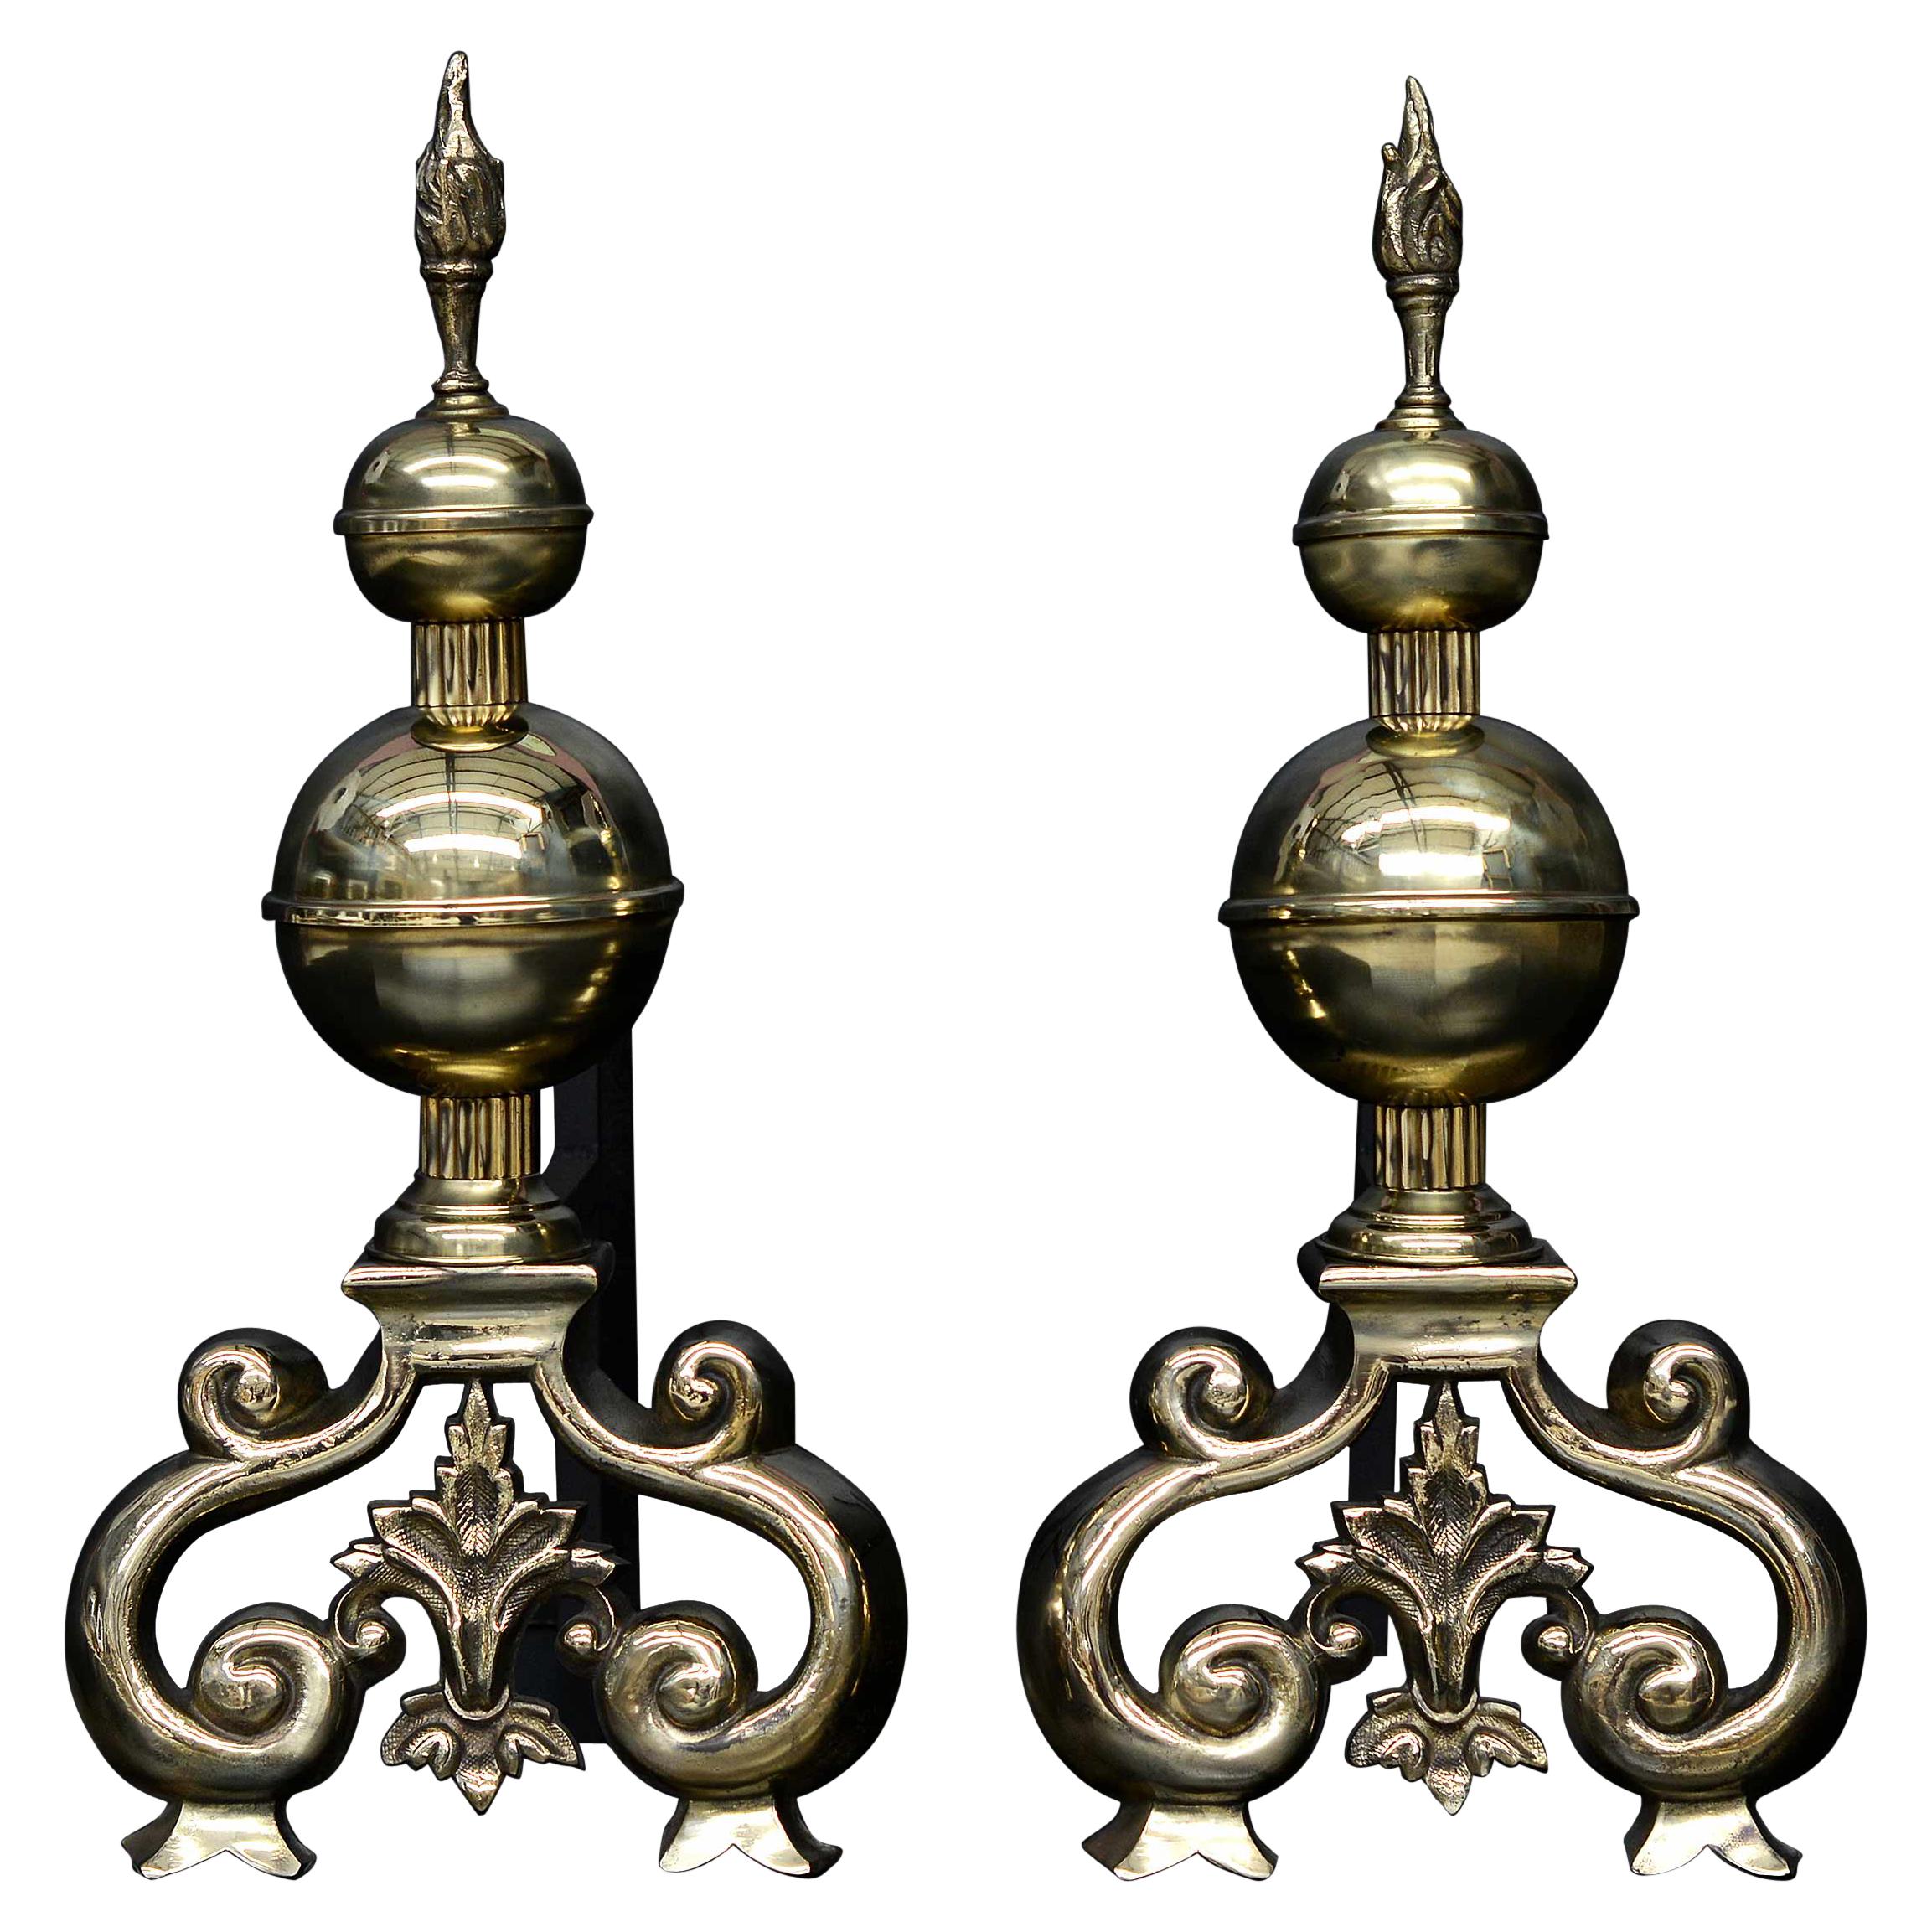 Substantial Pair of English Brass Firedogs